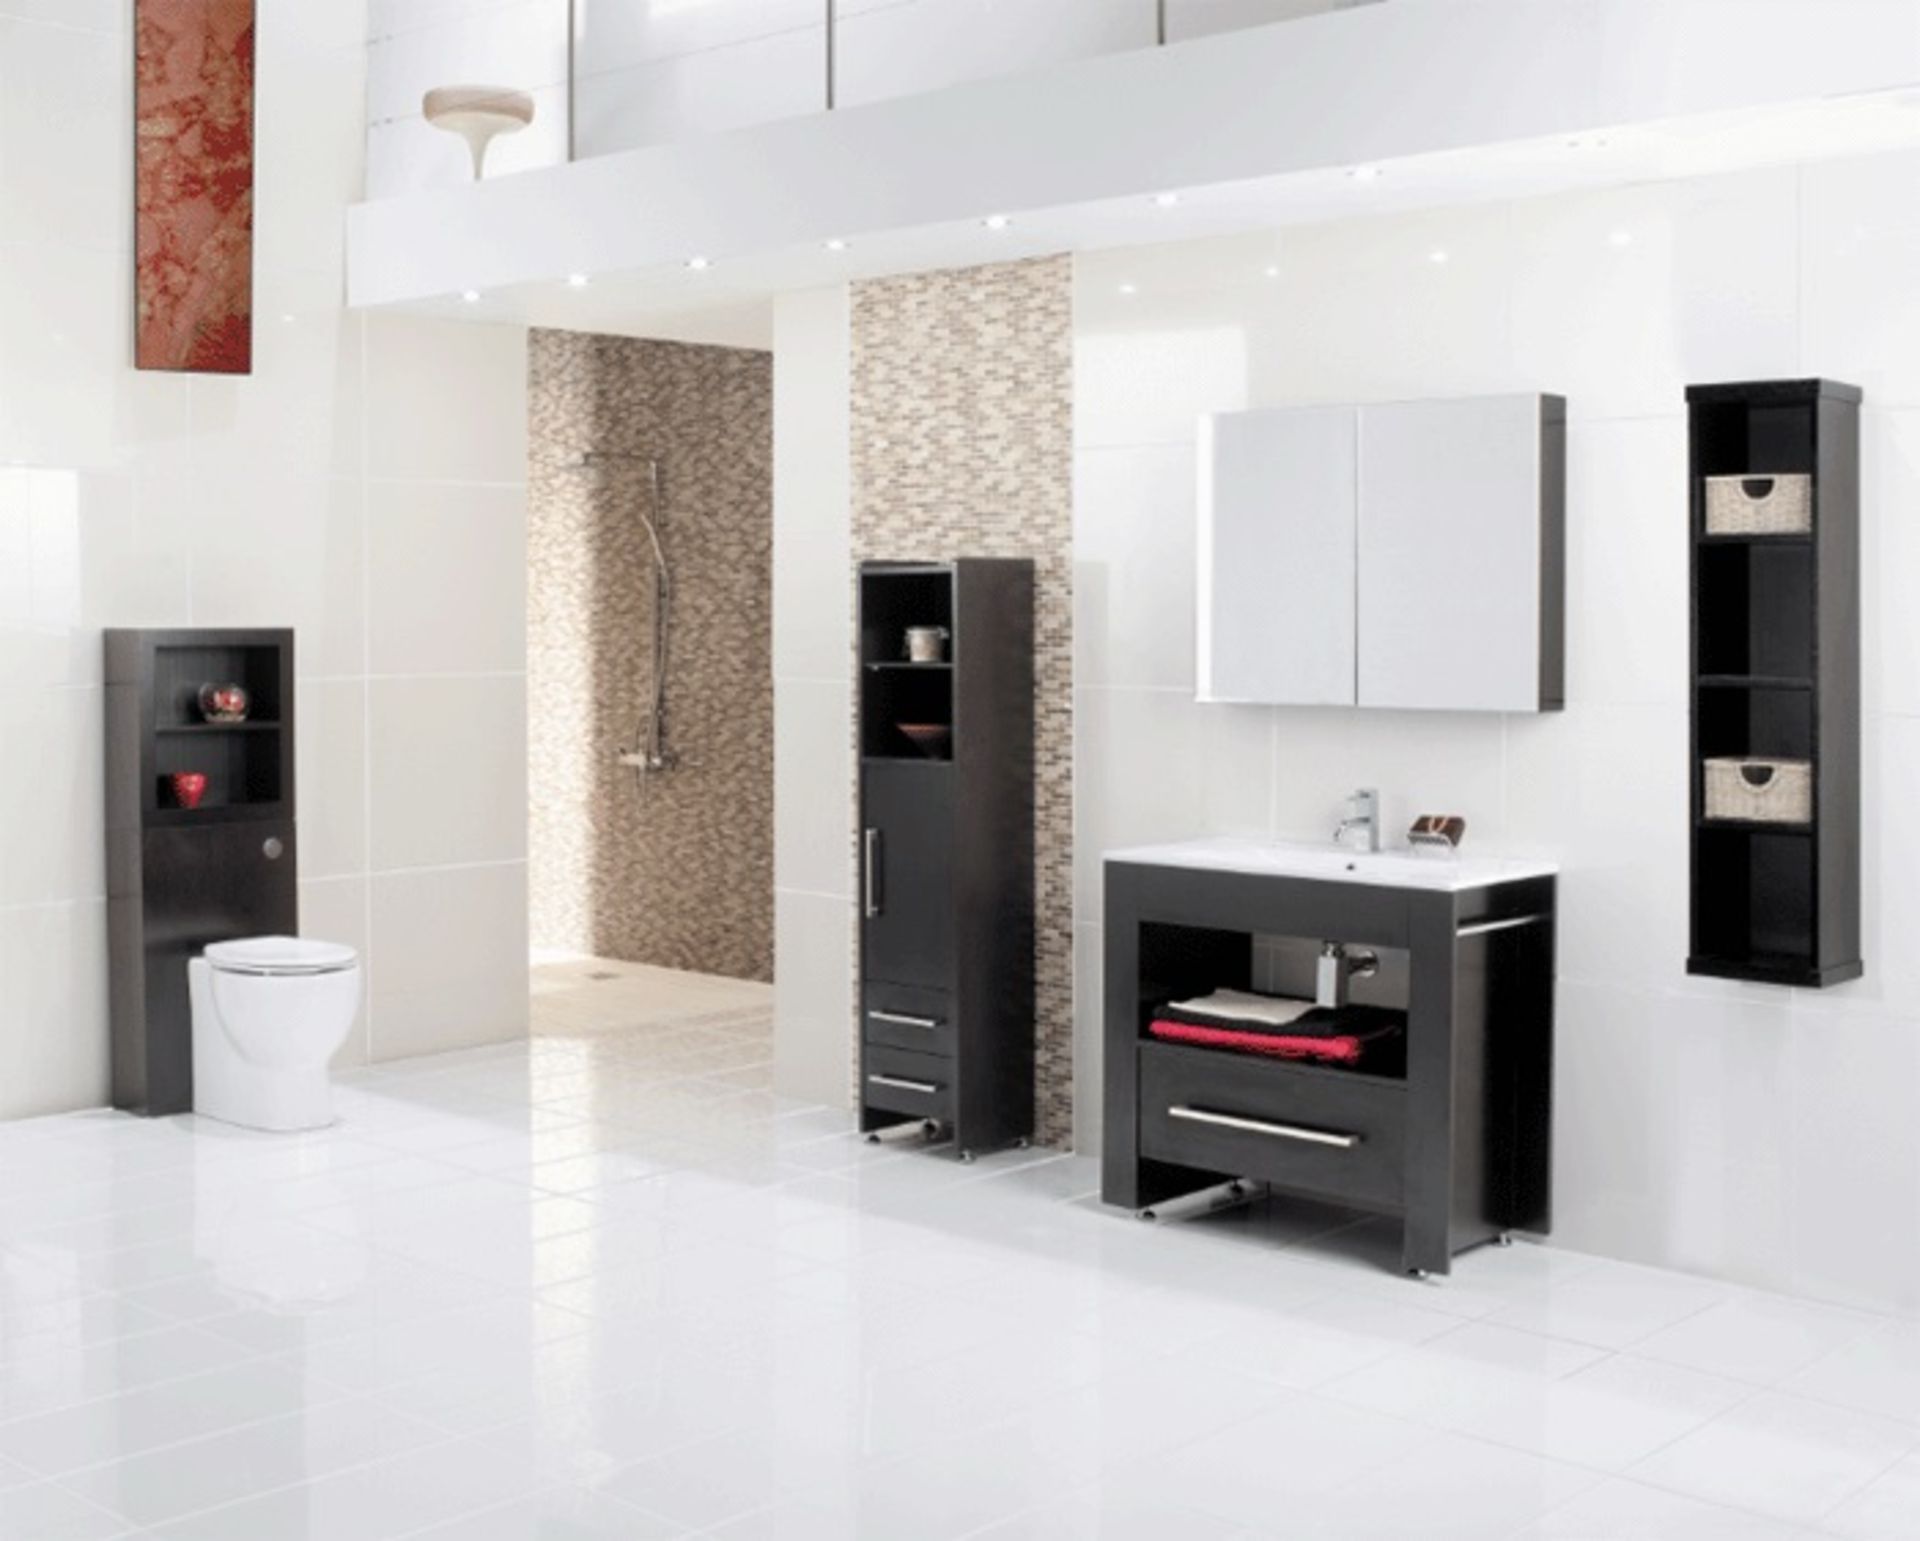 1 x Vogue ARC Bathroom Series 2 Tall Boy Unit - WENGE - Contemporary Design - Manufactured to the - Image 3 of 3